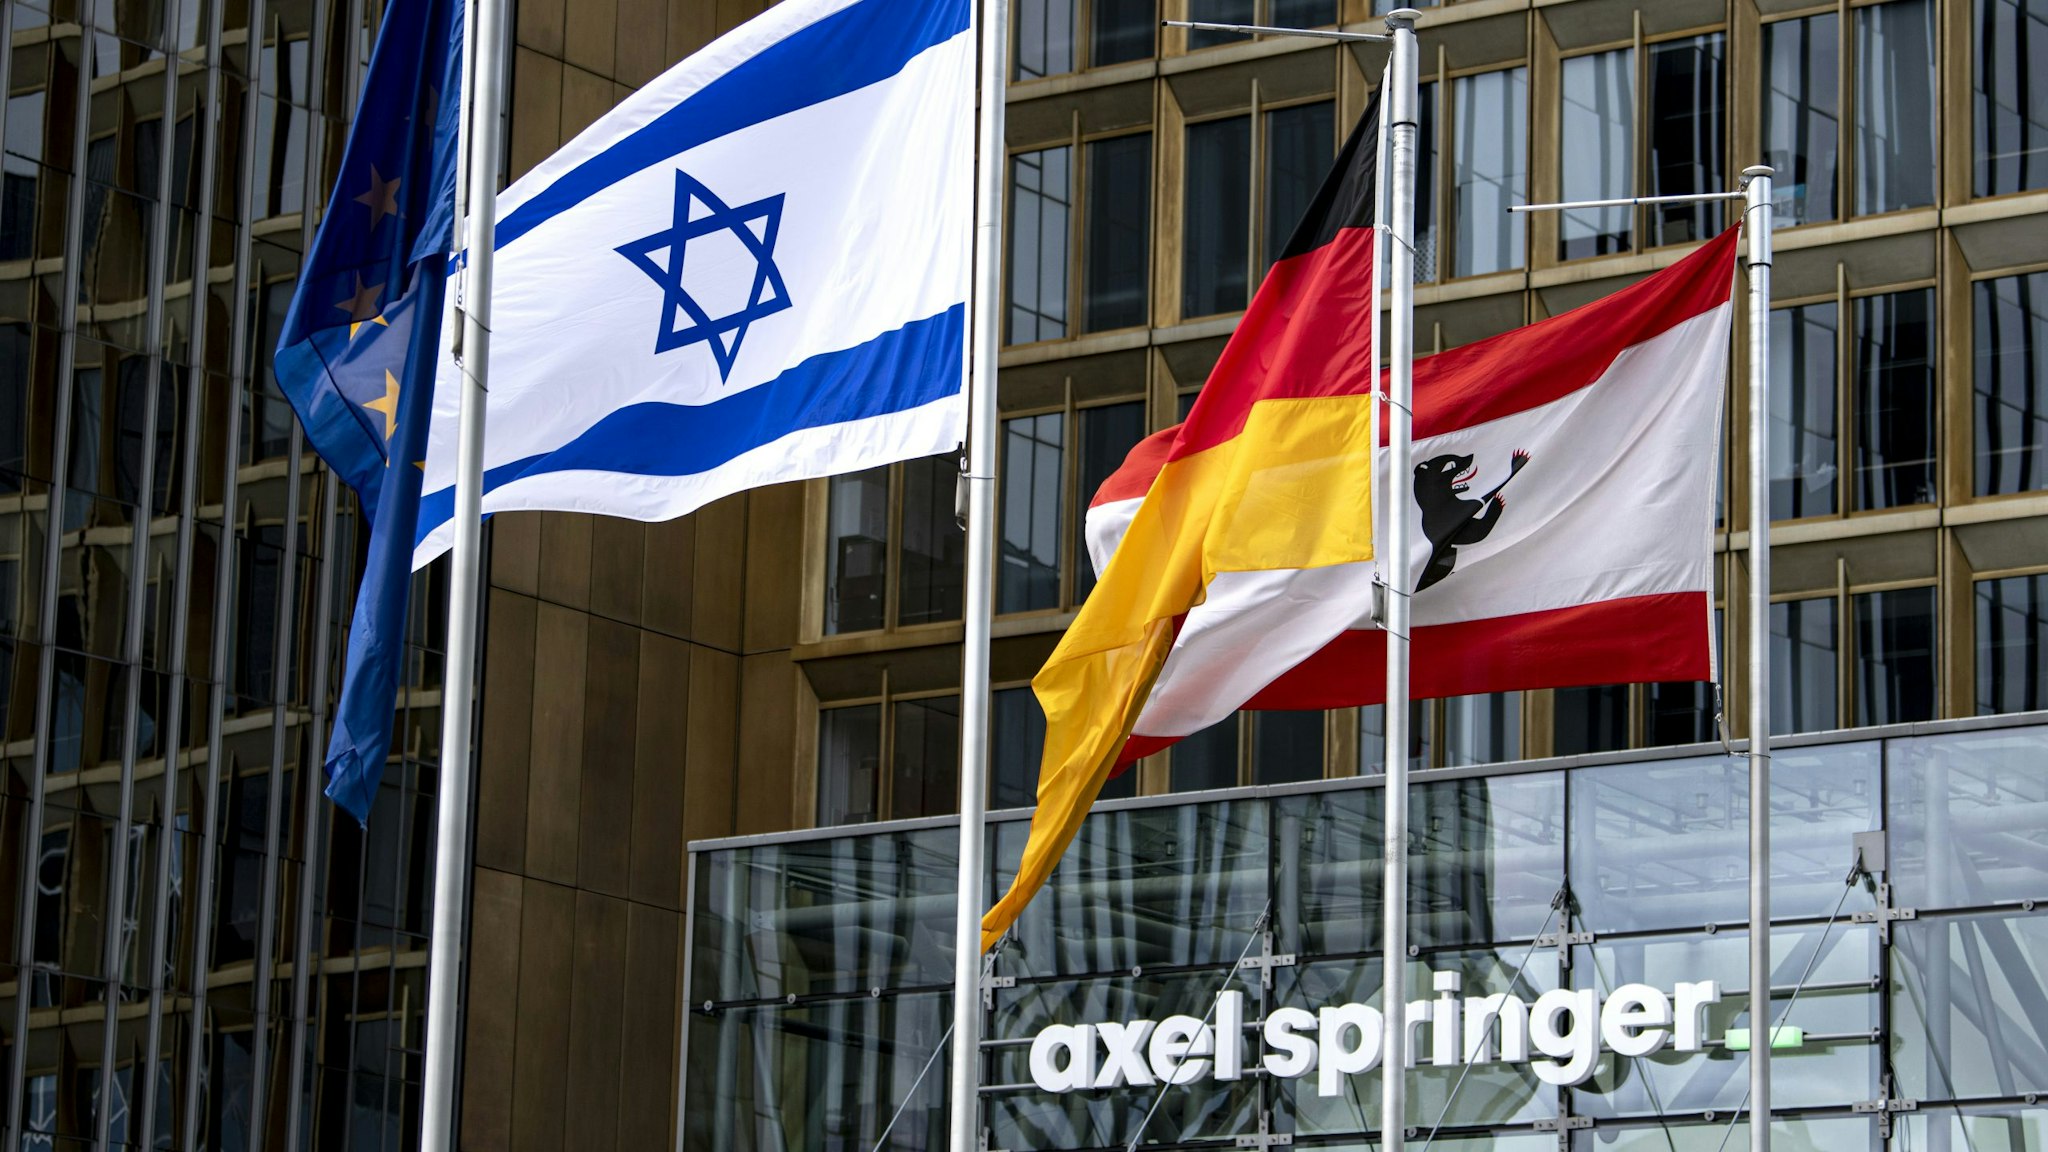 16 May 2021, Berlin: The Israeli flag, which was raised on Sunday morning, flies in front of the Axel Springer building. In addition, the (l-r) European, German and Berlin flags can be seen.